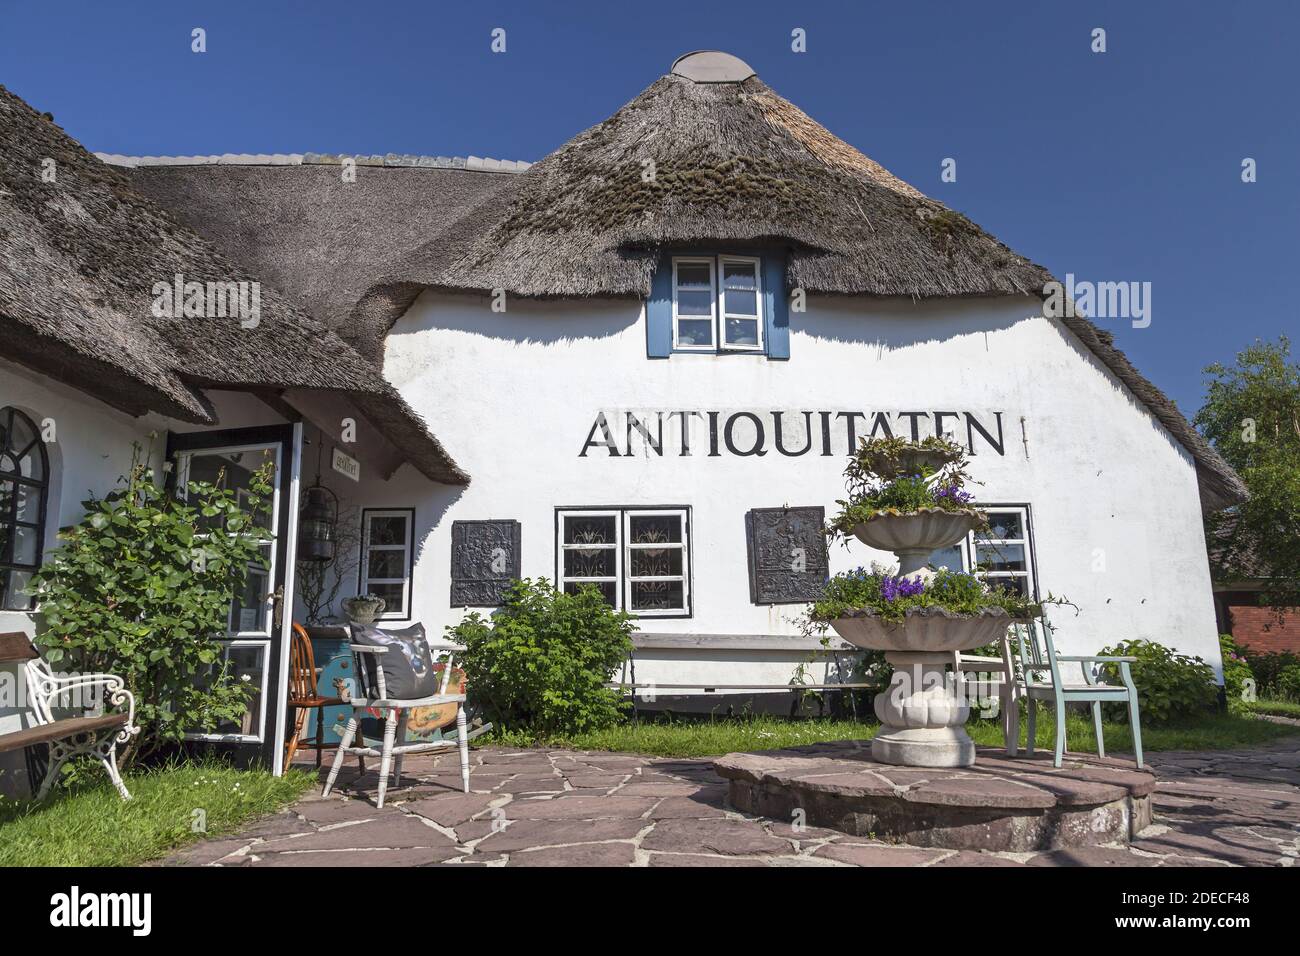 geography / travel, Germany, Schleswig-Holstein, isle Sylt, thatched-roof house in Westerland, Additional-Rights-Clearance-Info-Not-Available Stock Photo